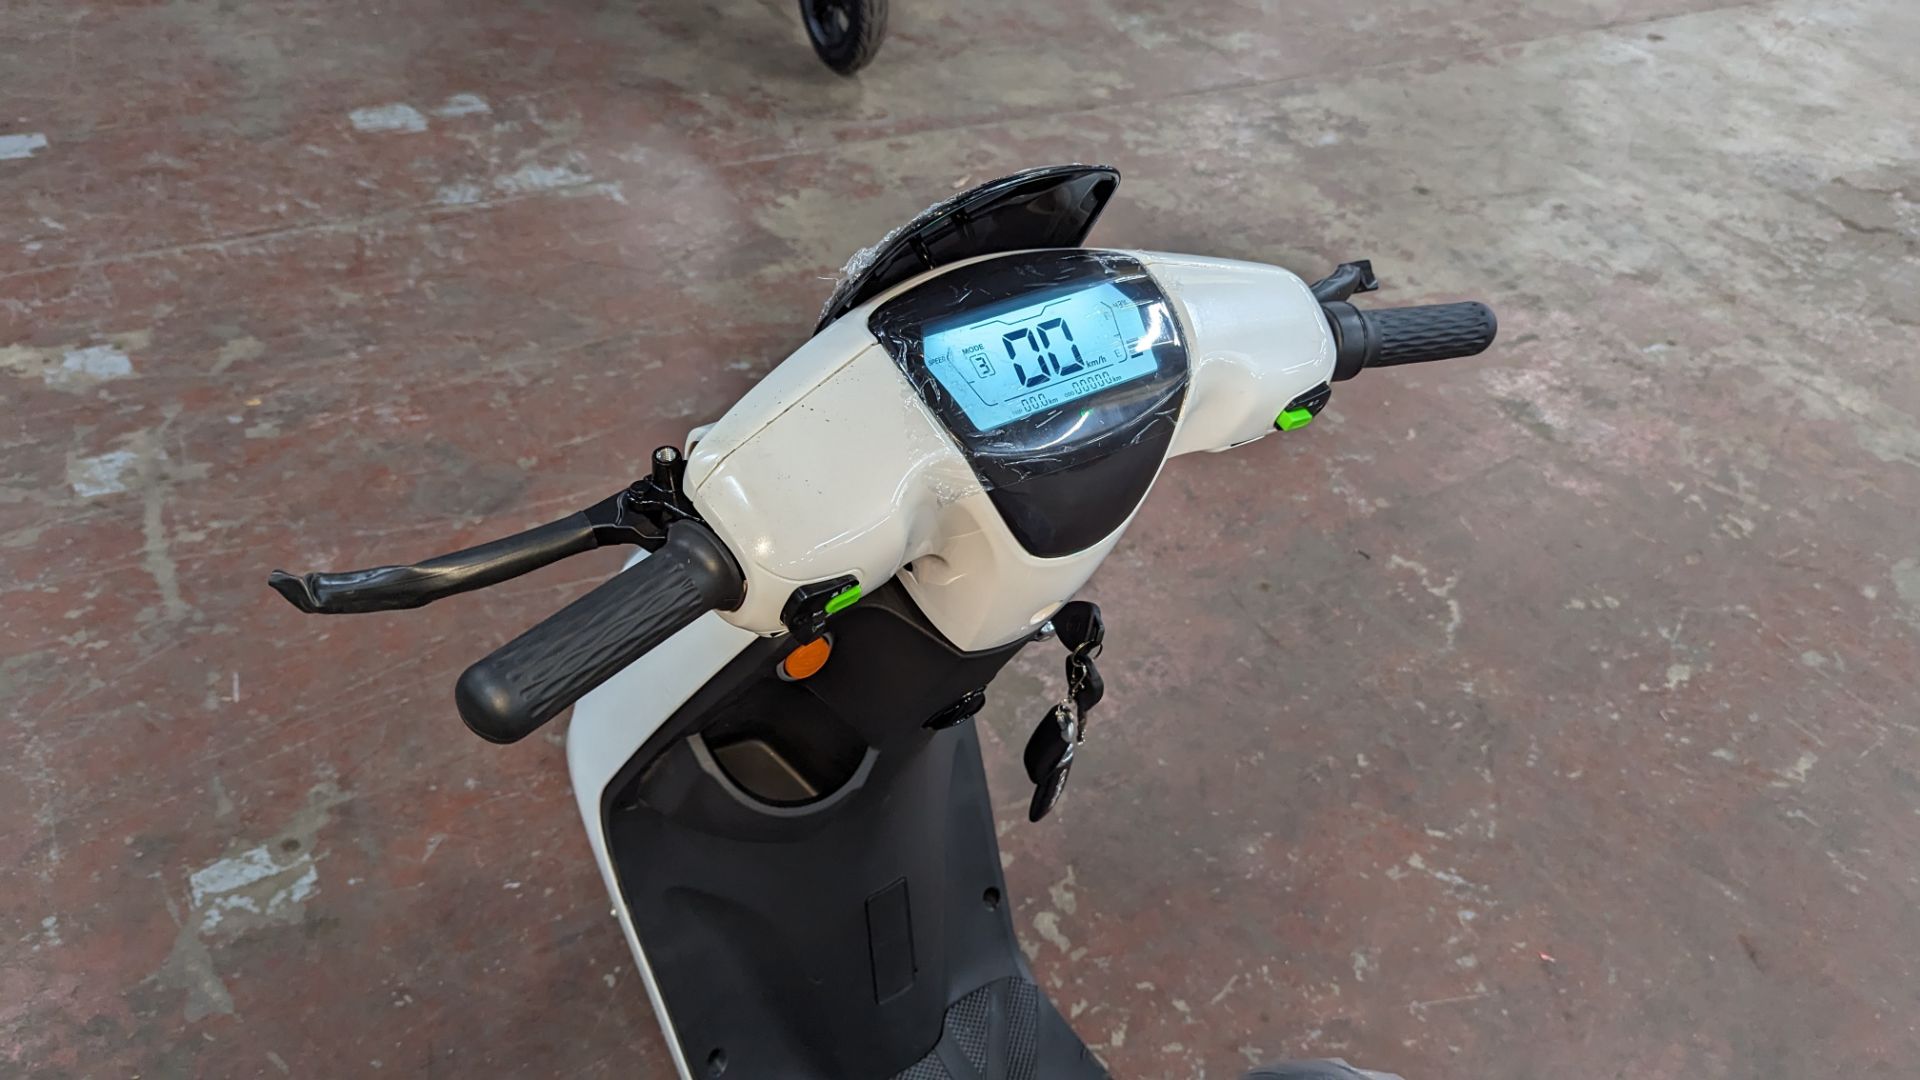 Model 18 Electric Bike: Zero (0) recorded miles, white body with black detailing, insulated box moun - Image 10 of 14